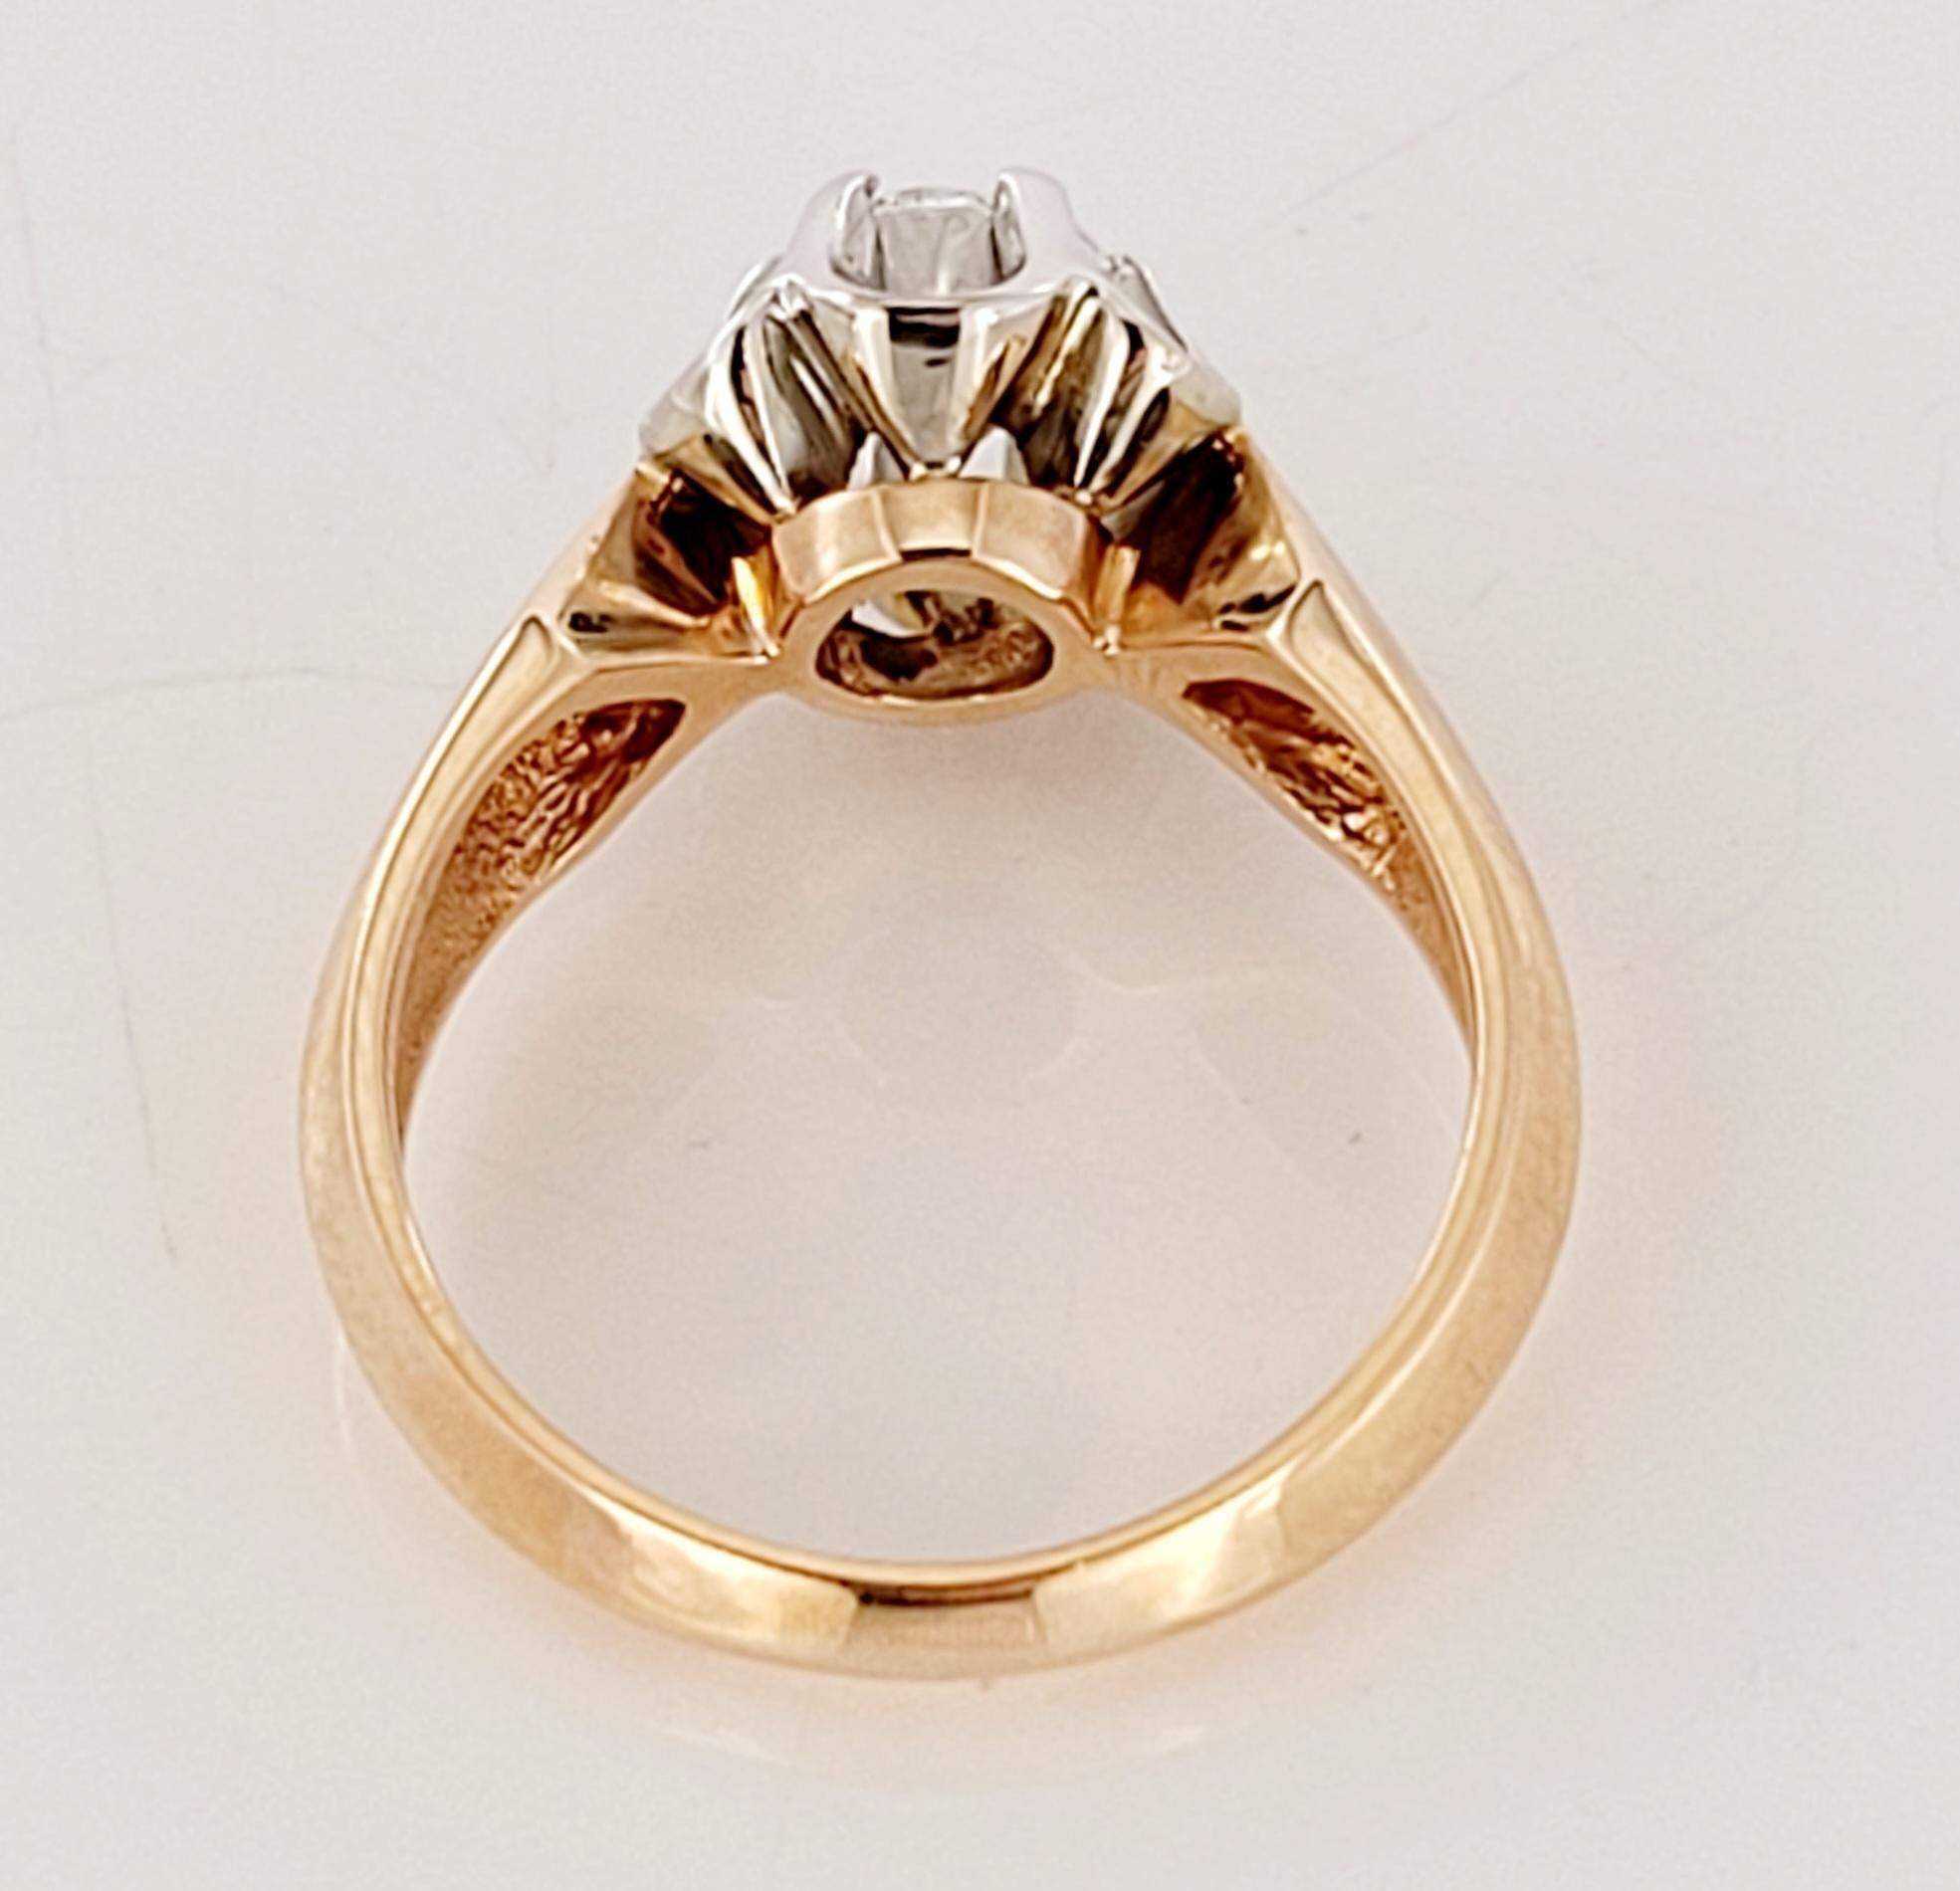 Women's Vintage European Style Solitaire 1 ct Diamon Ring in 14K Rose Gold and Palladium For Sale